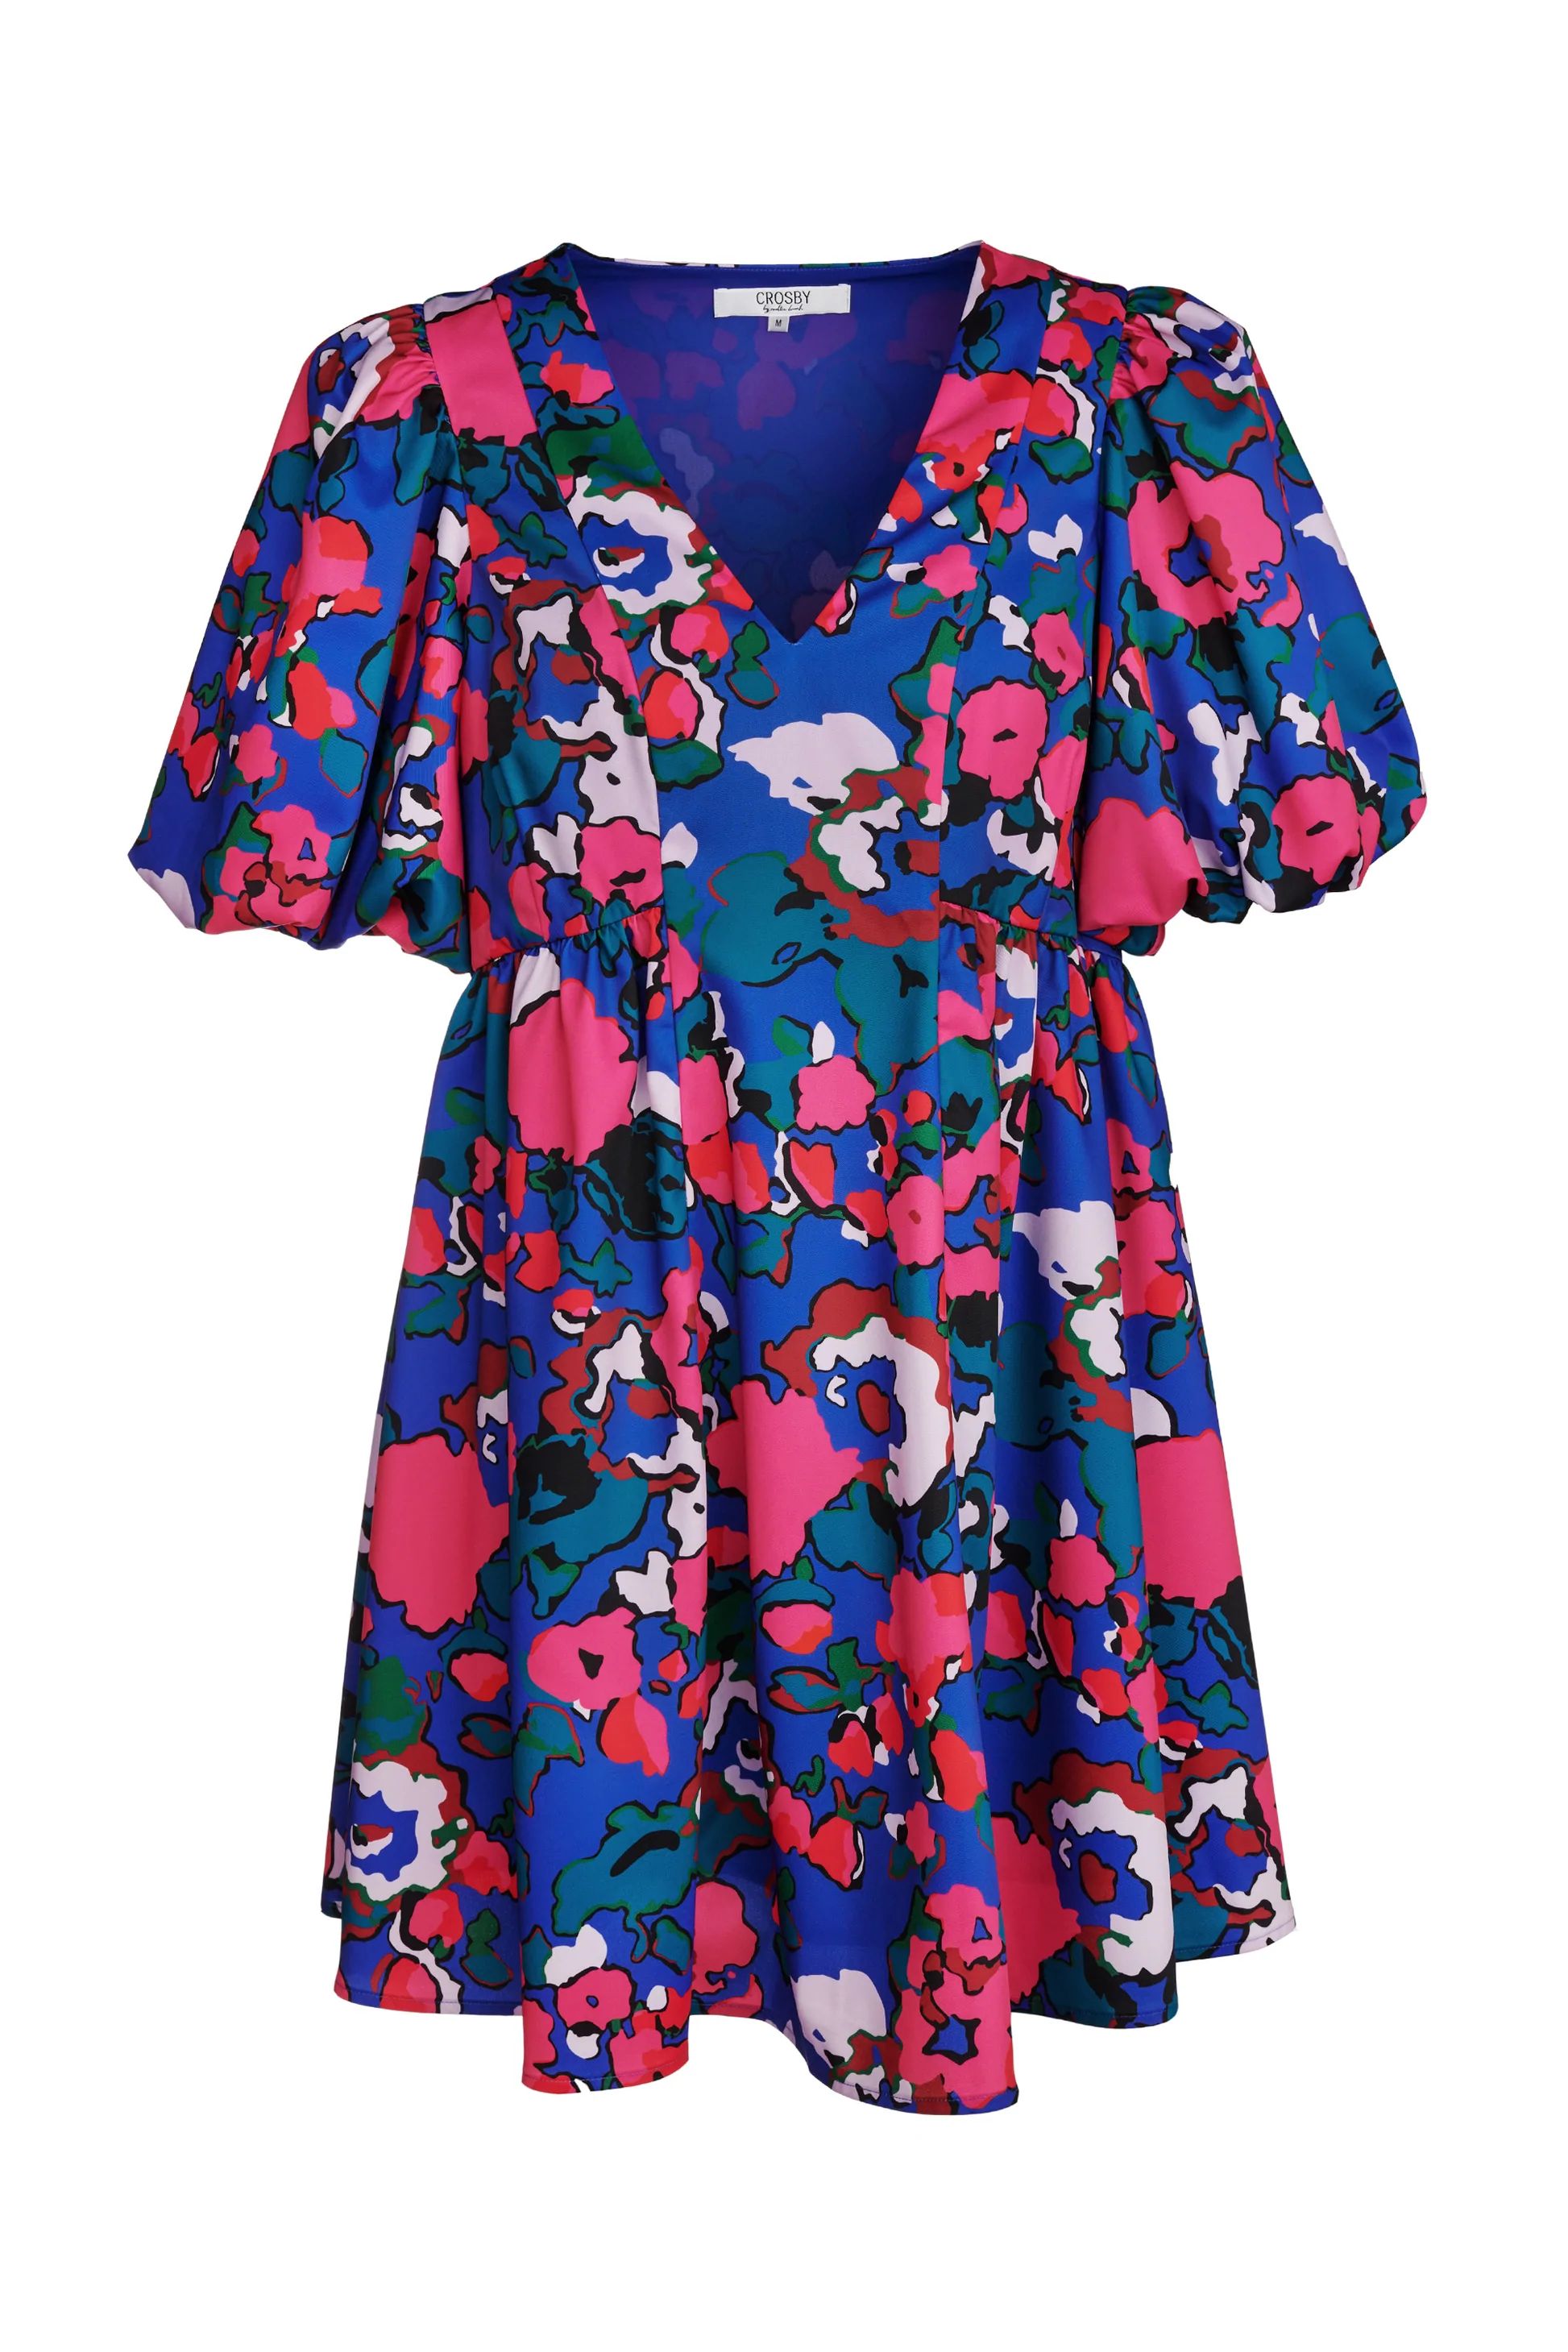 Kilby Dress in Party Floral - CROSBY by Mollie Burch | CROSBY by Mollie Burch